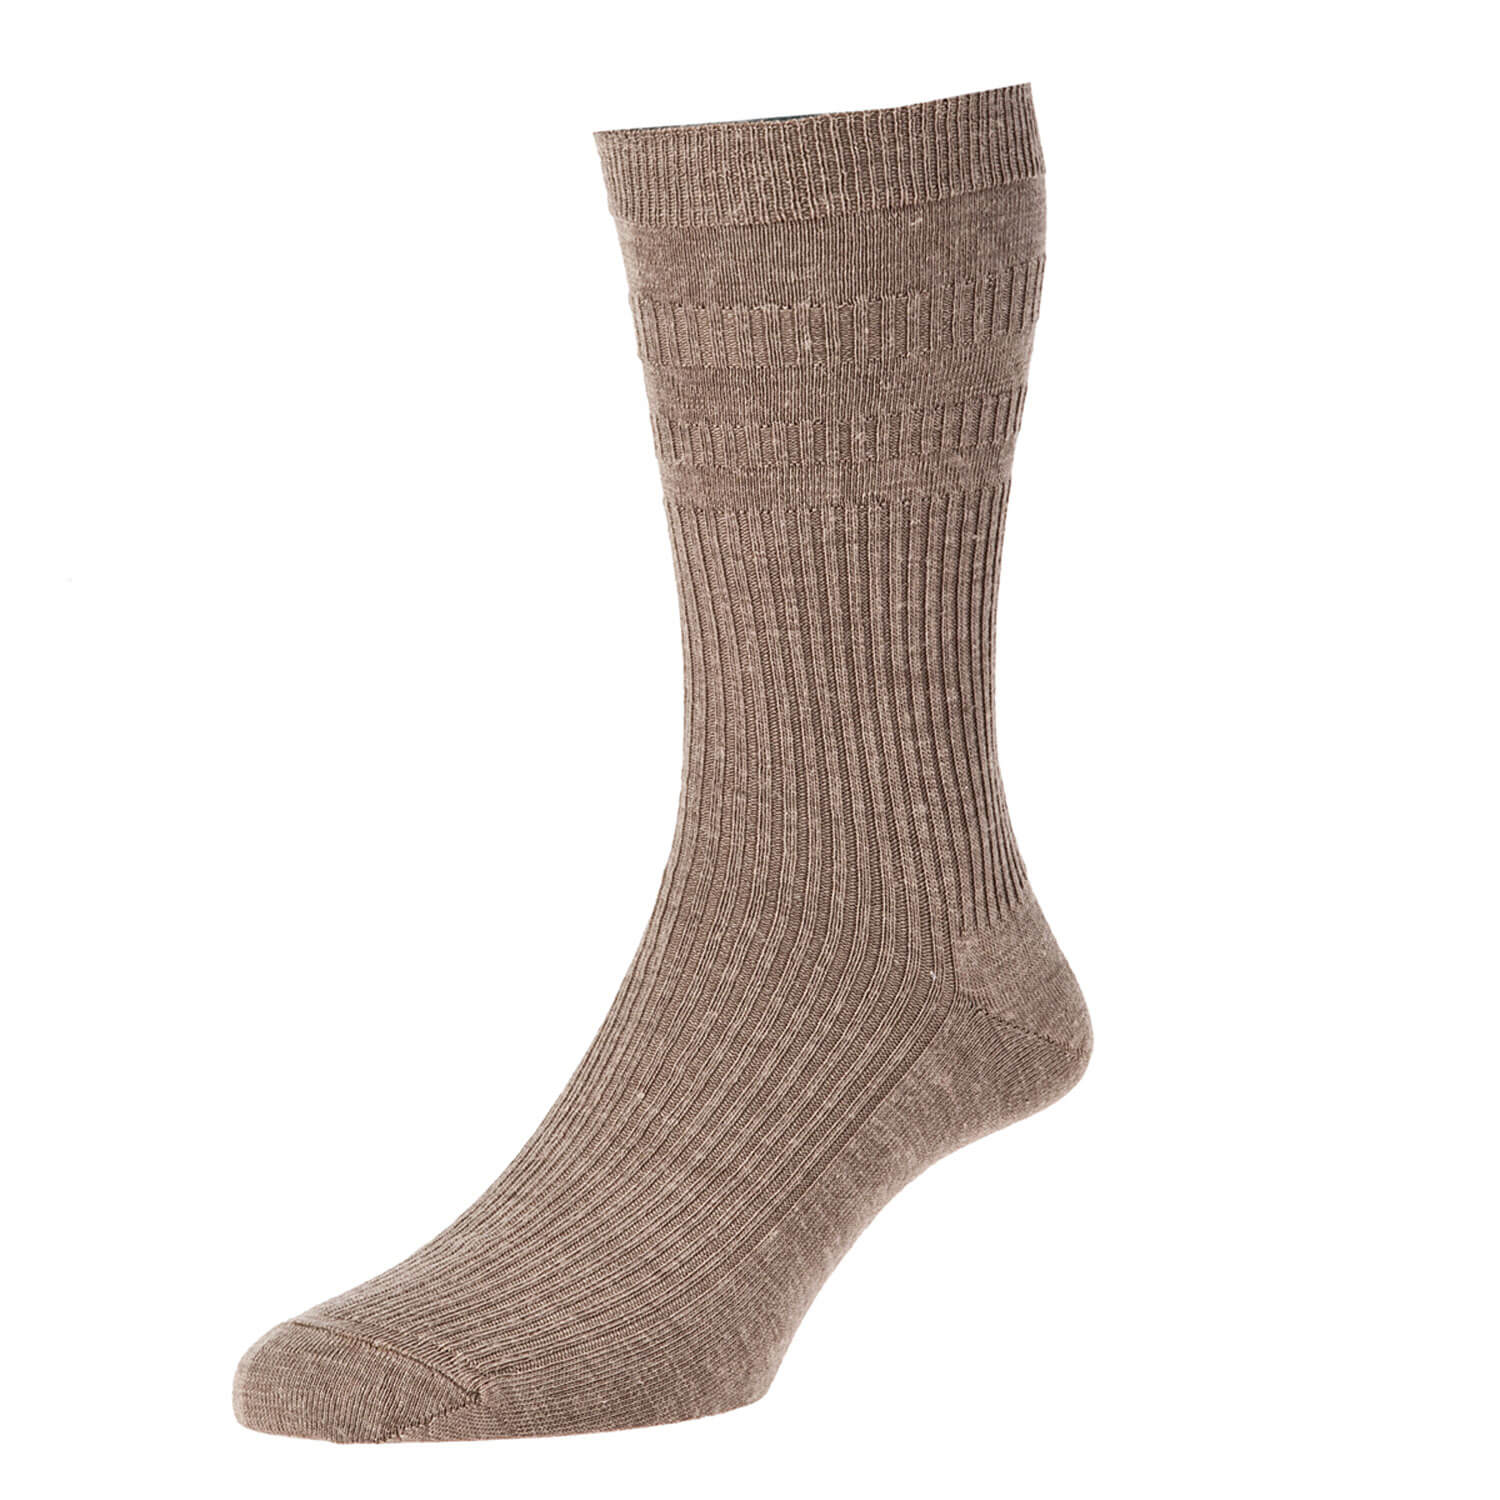 Hj Hall Softop Botany Wool Rich Diabetic Socks - Taupe 1 Shaws Department Stores